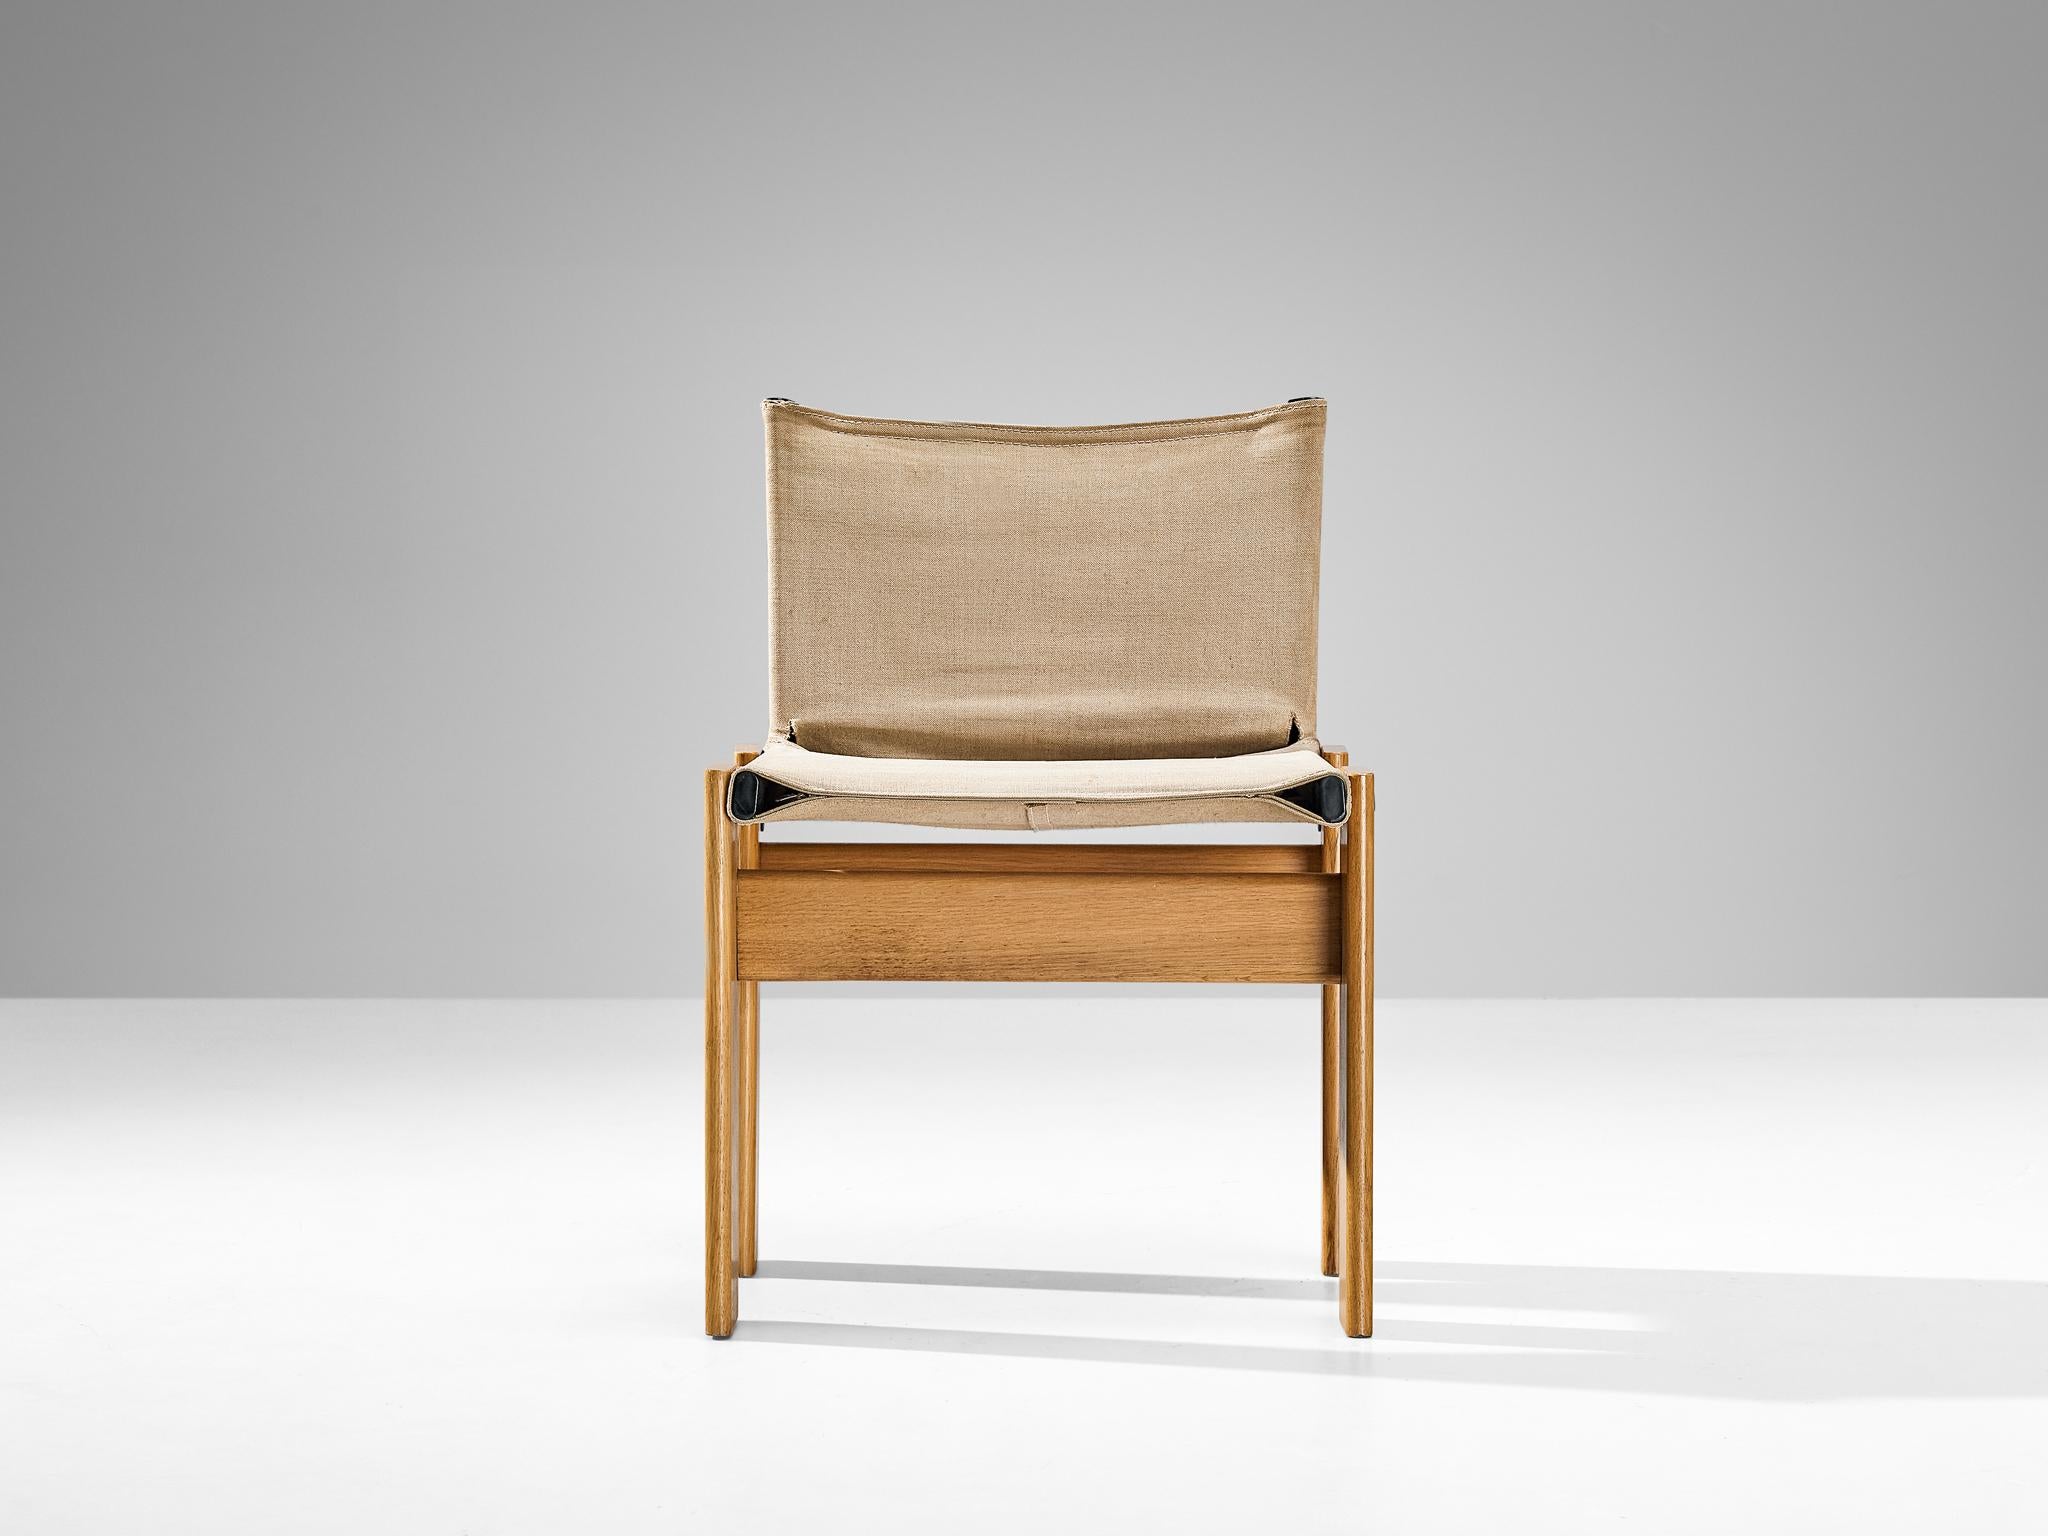 Steel Afra & Tobia Scarpa for Molteni 'Monk' Chair in Oak and Beige Canvas